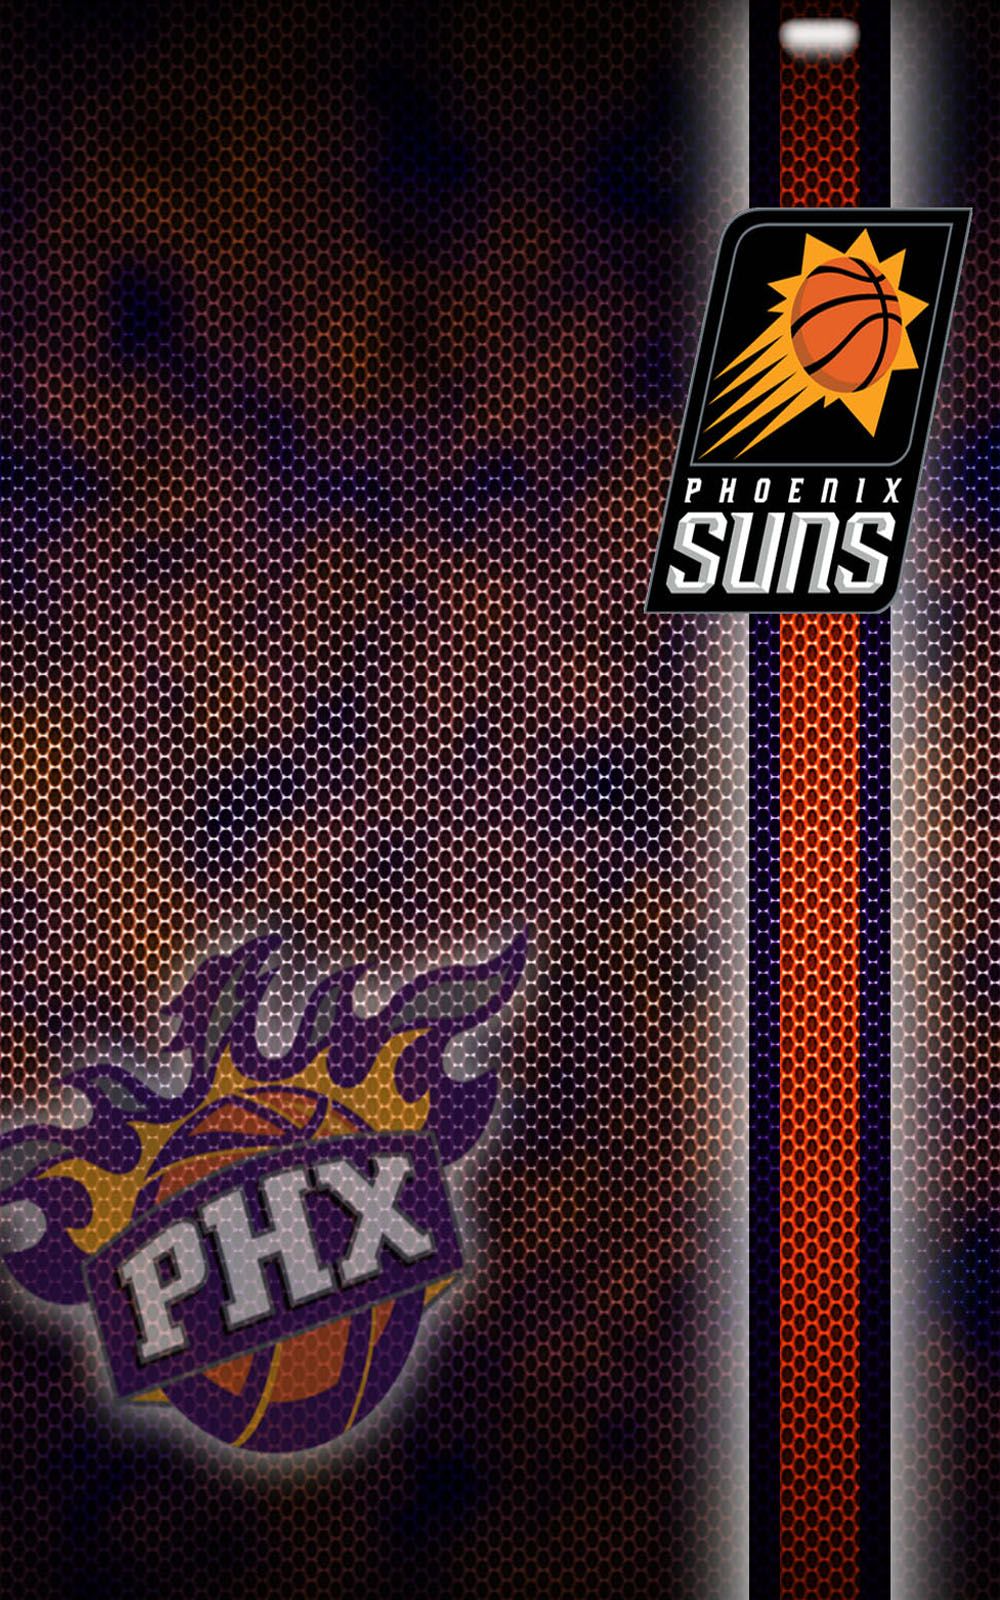 HoopsWallpaperscom  Get the latest HD and mobile NBA wallpapers today Phoenix  Suns Archives  HoopsWallpaperscom  Get the latest HD and mobile NBA  wallpapers today